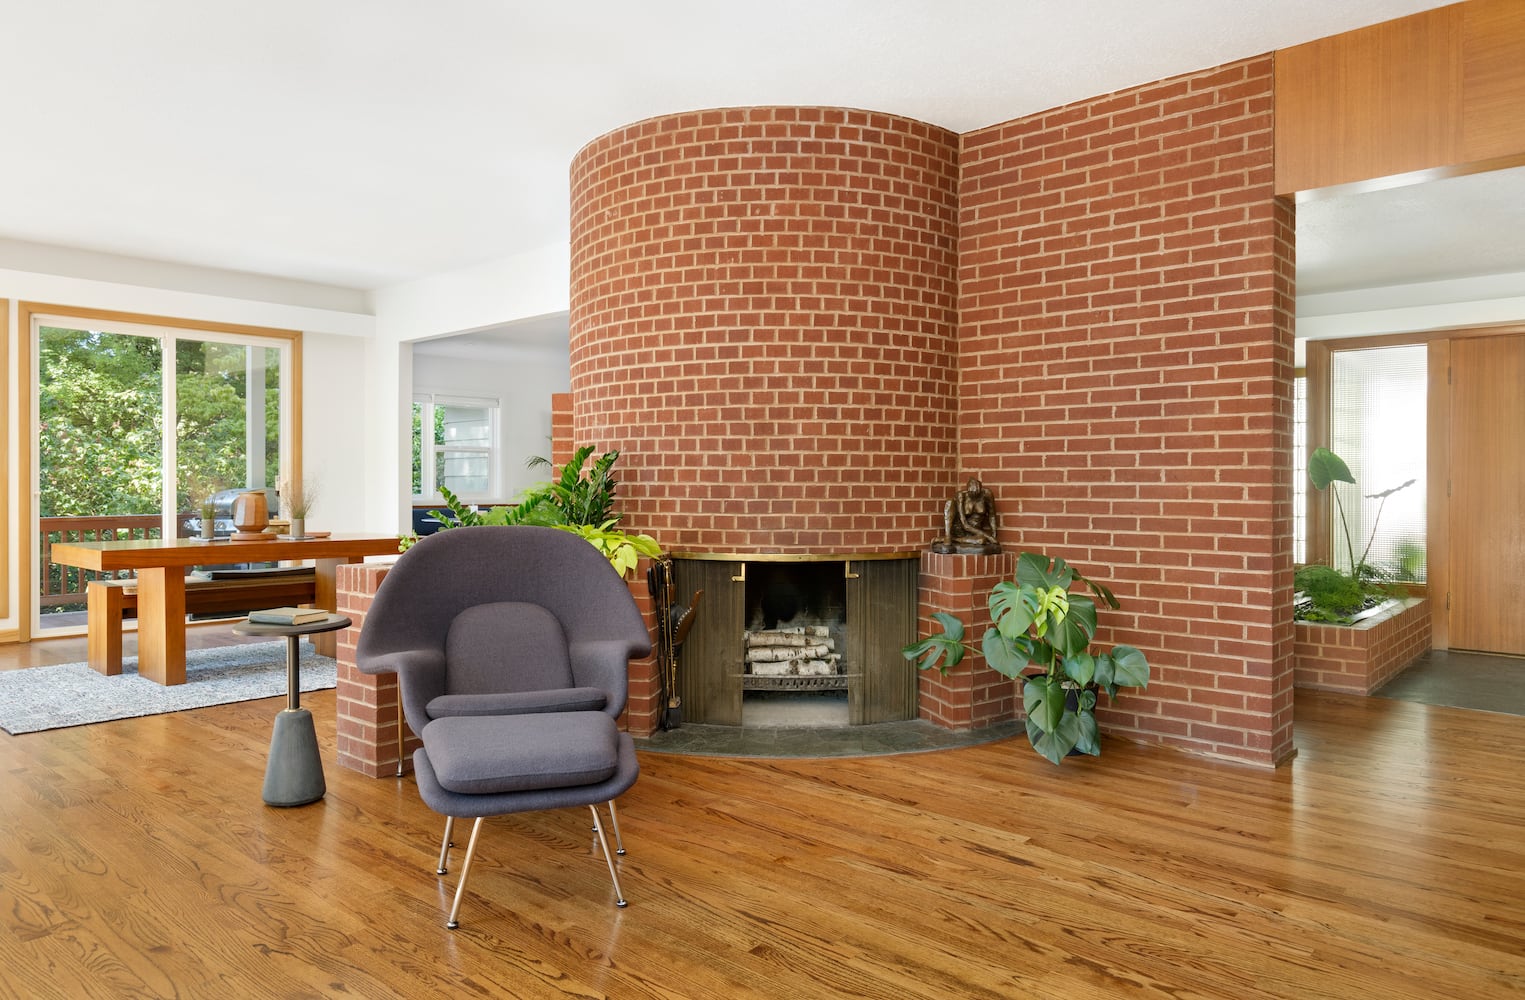 Full view of circular brick fireplace showing dining area and entry